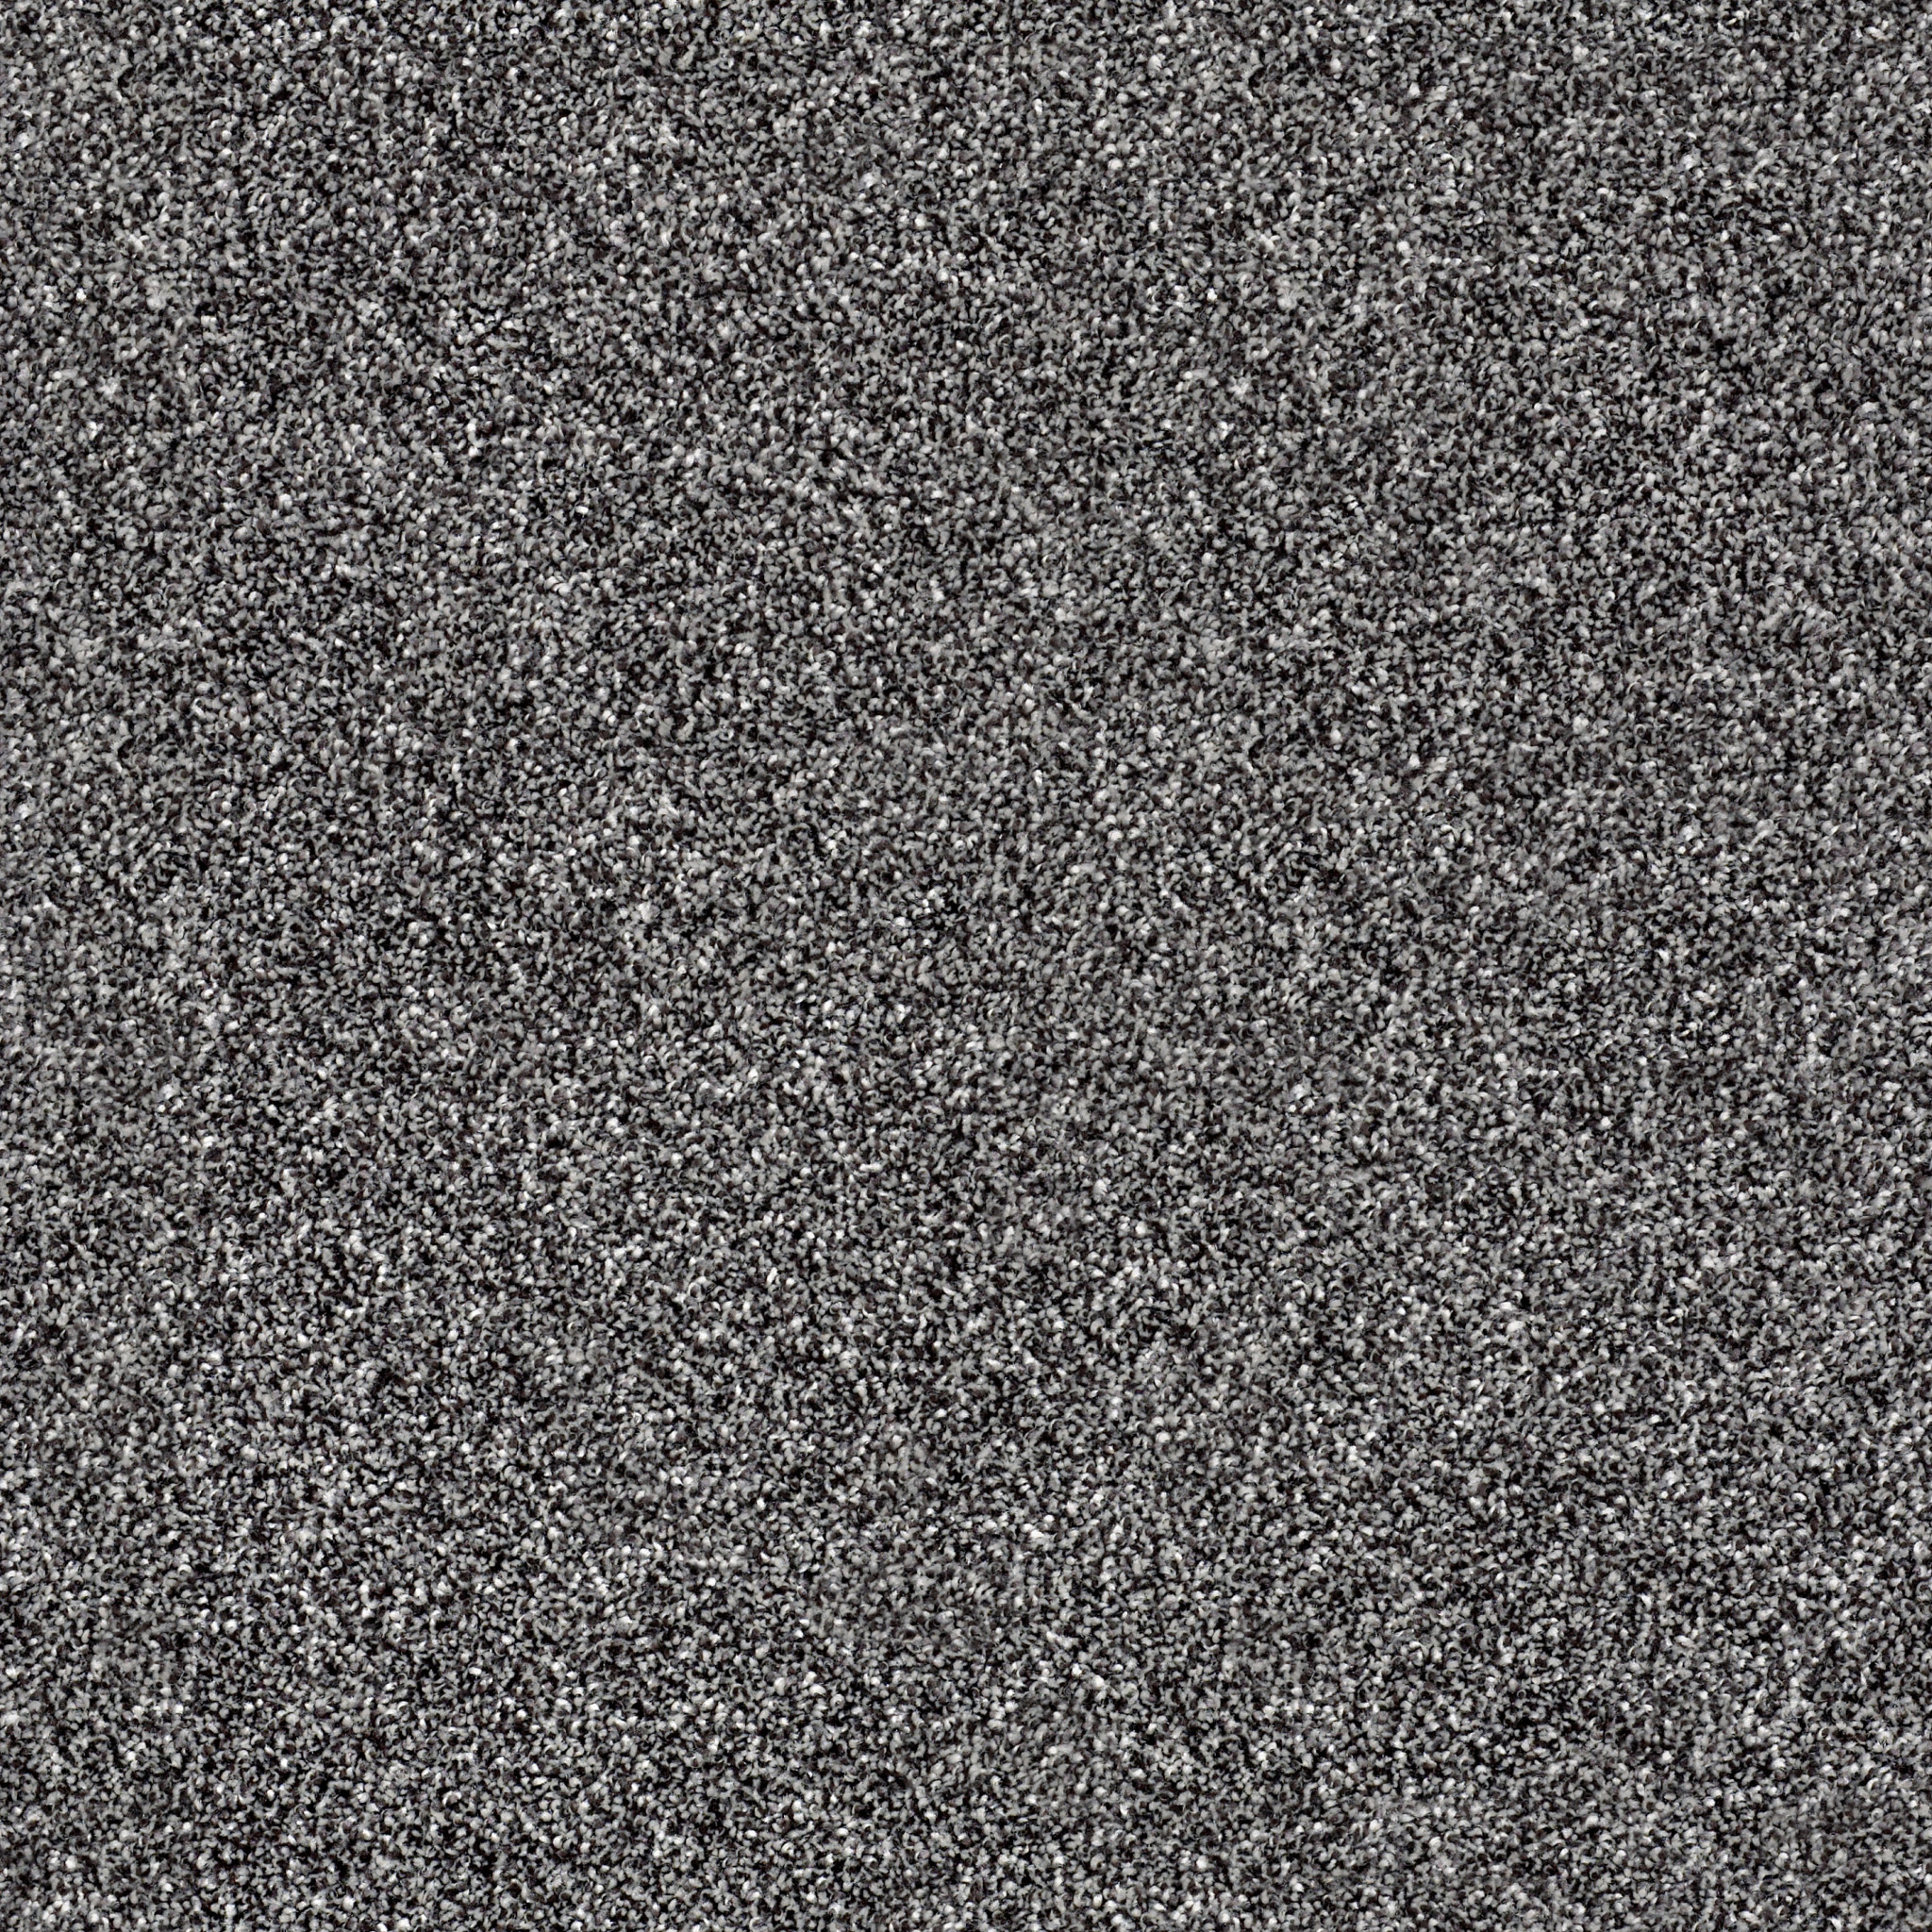 Search Carpet Results | Shaw Floors